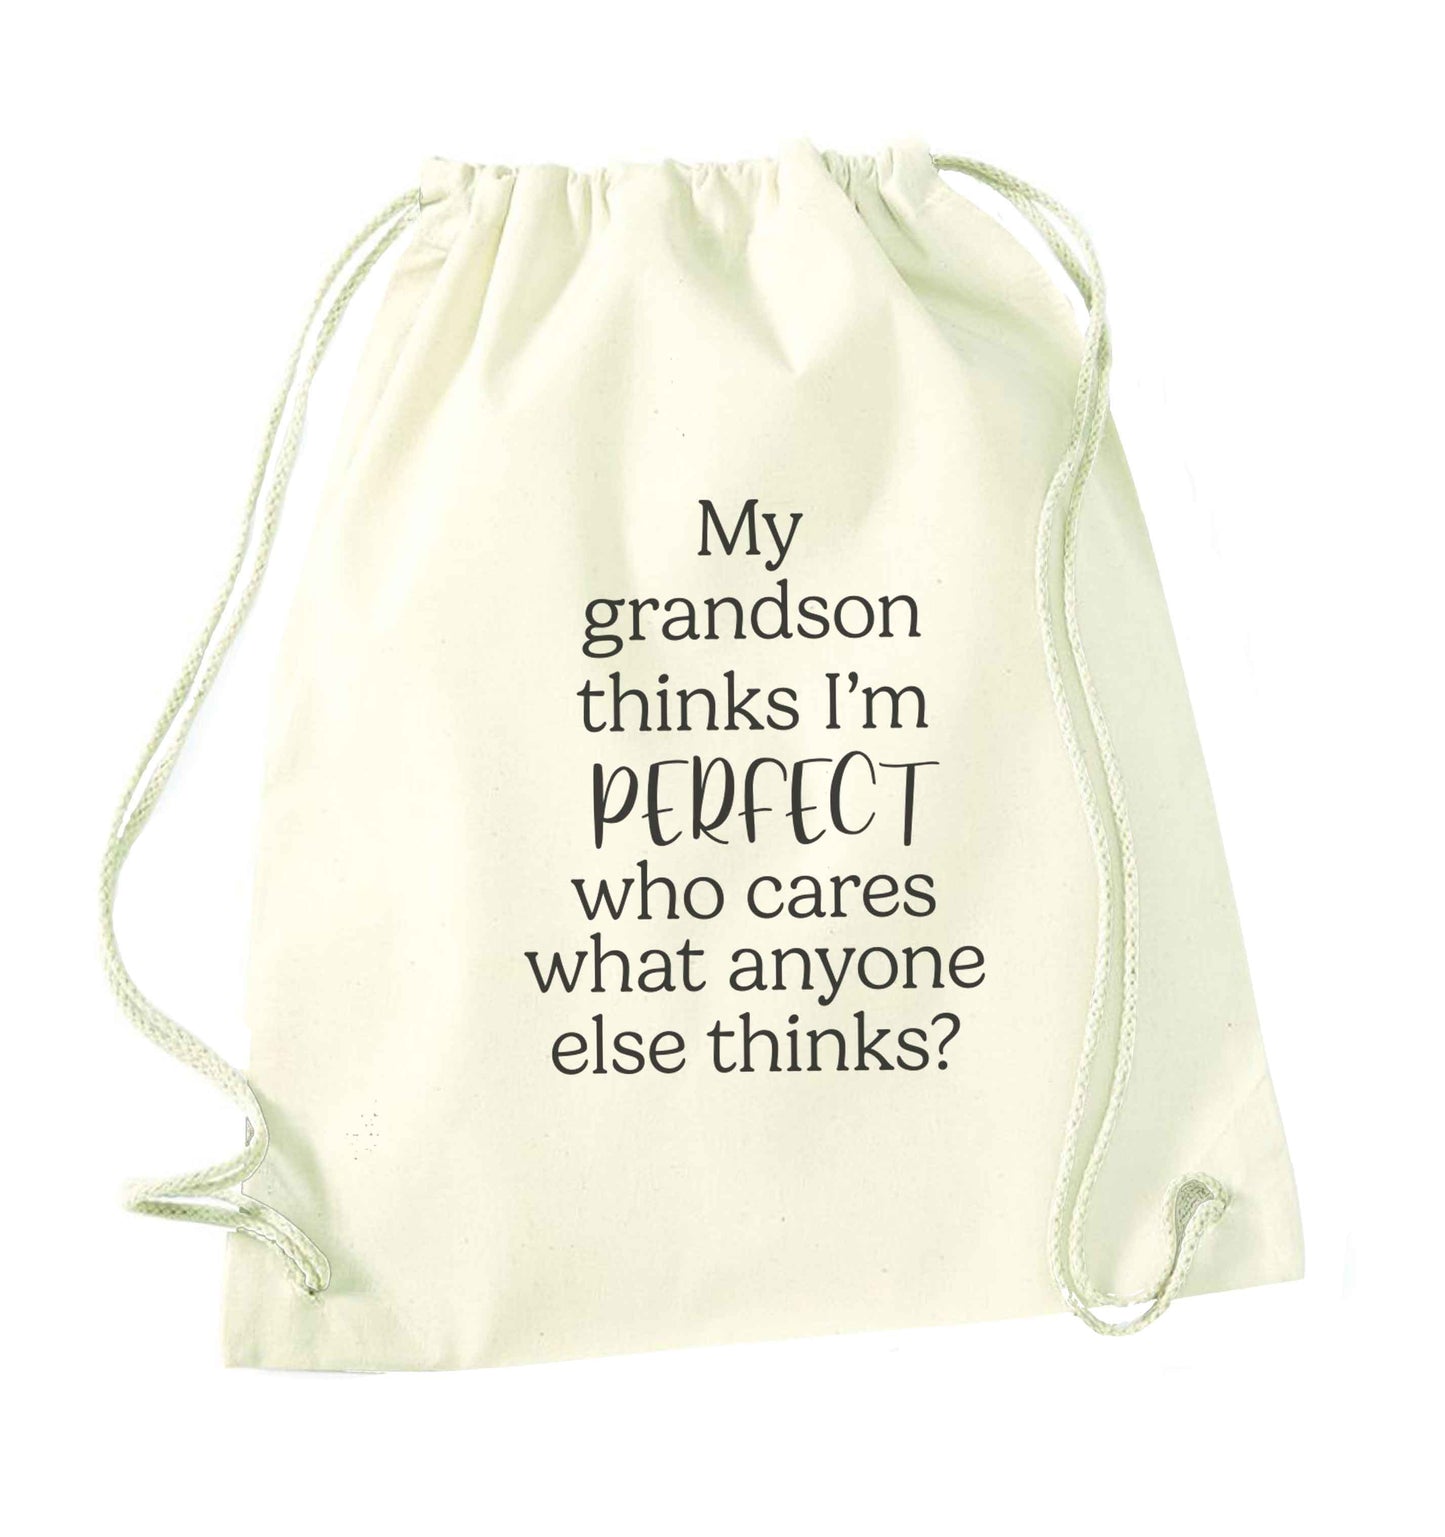 My Grandson thinks I'm perfect who cares what anyone else thinks? natural drawstring bag